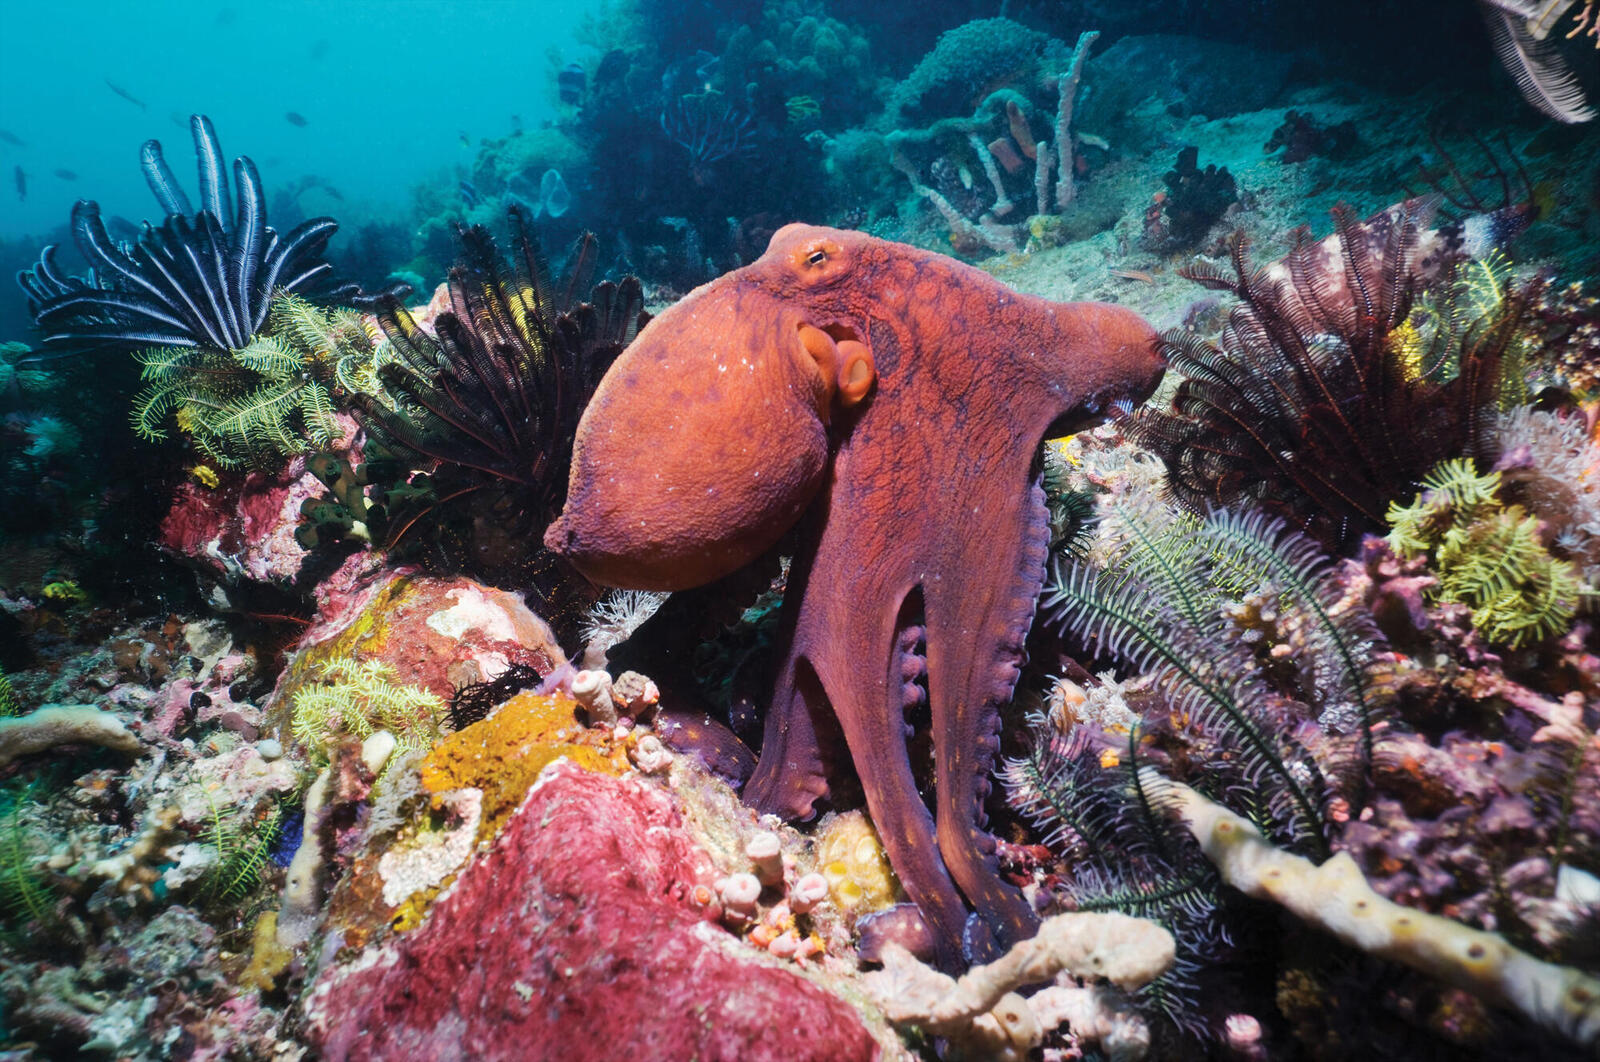 Meet the master of camouflage, the day octopus | Magazine Articles | WWF